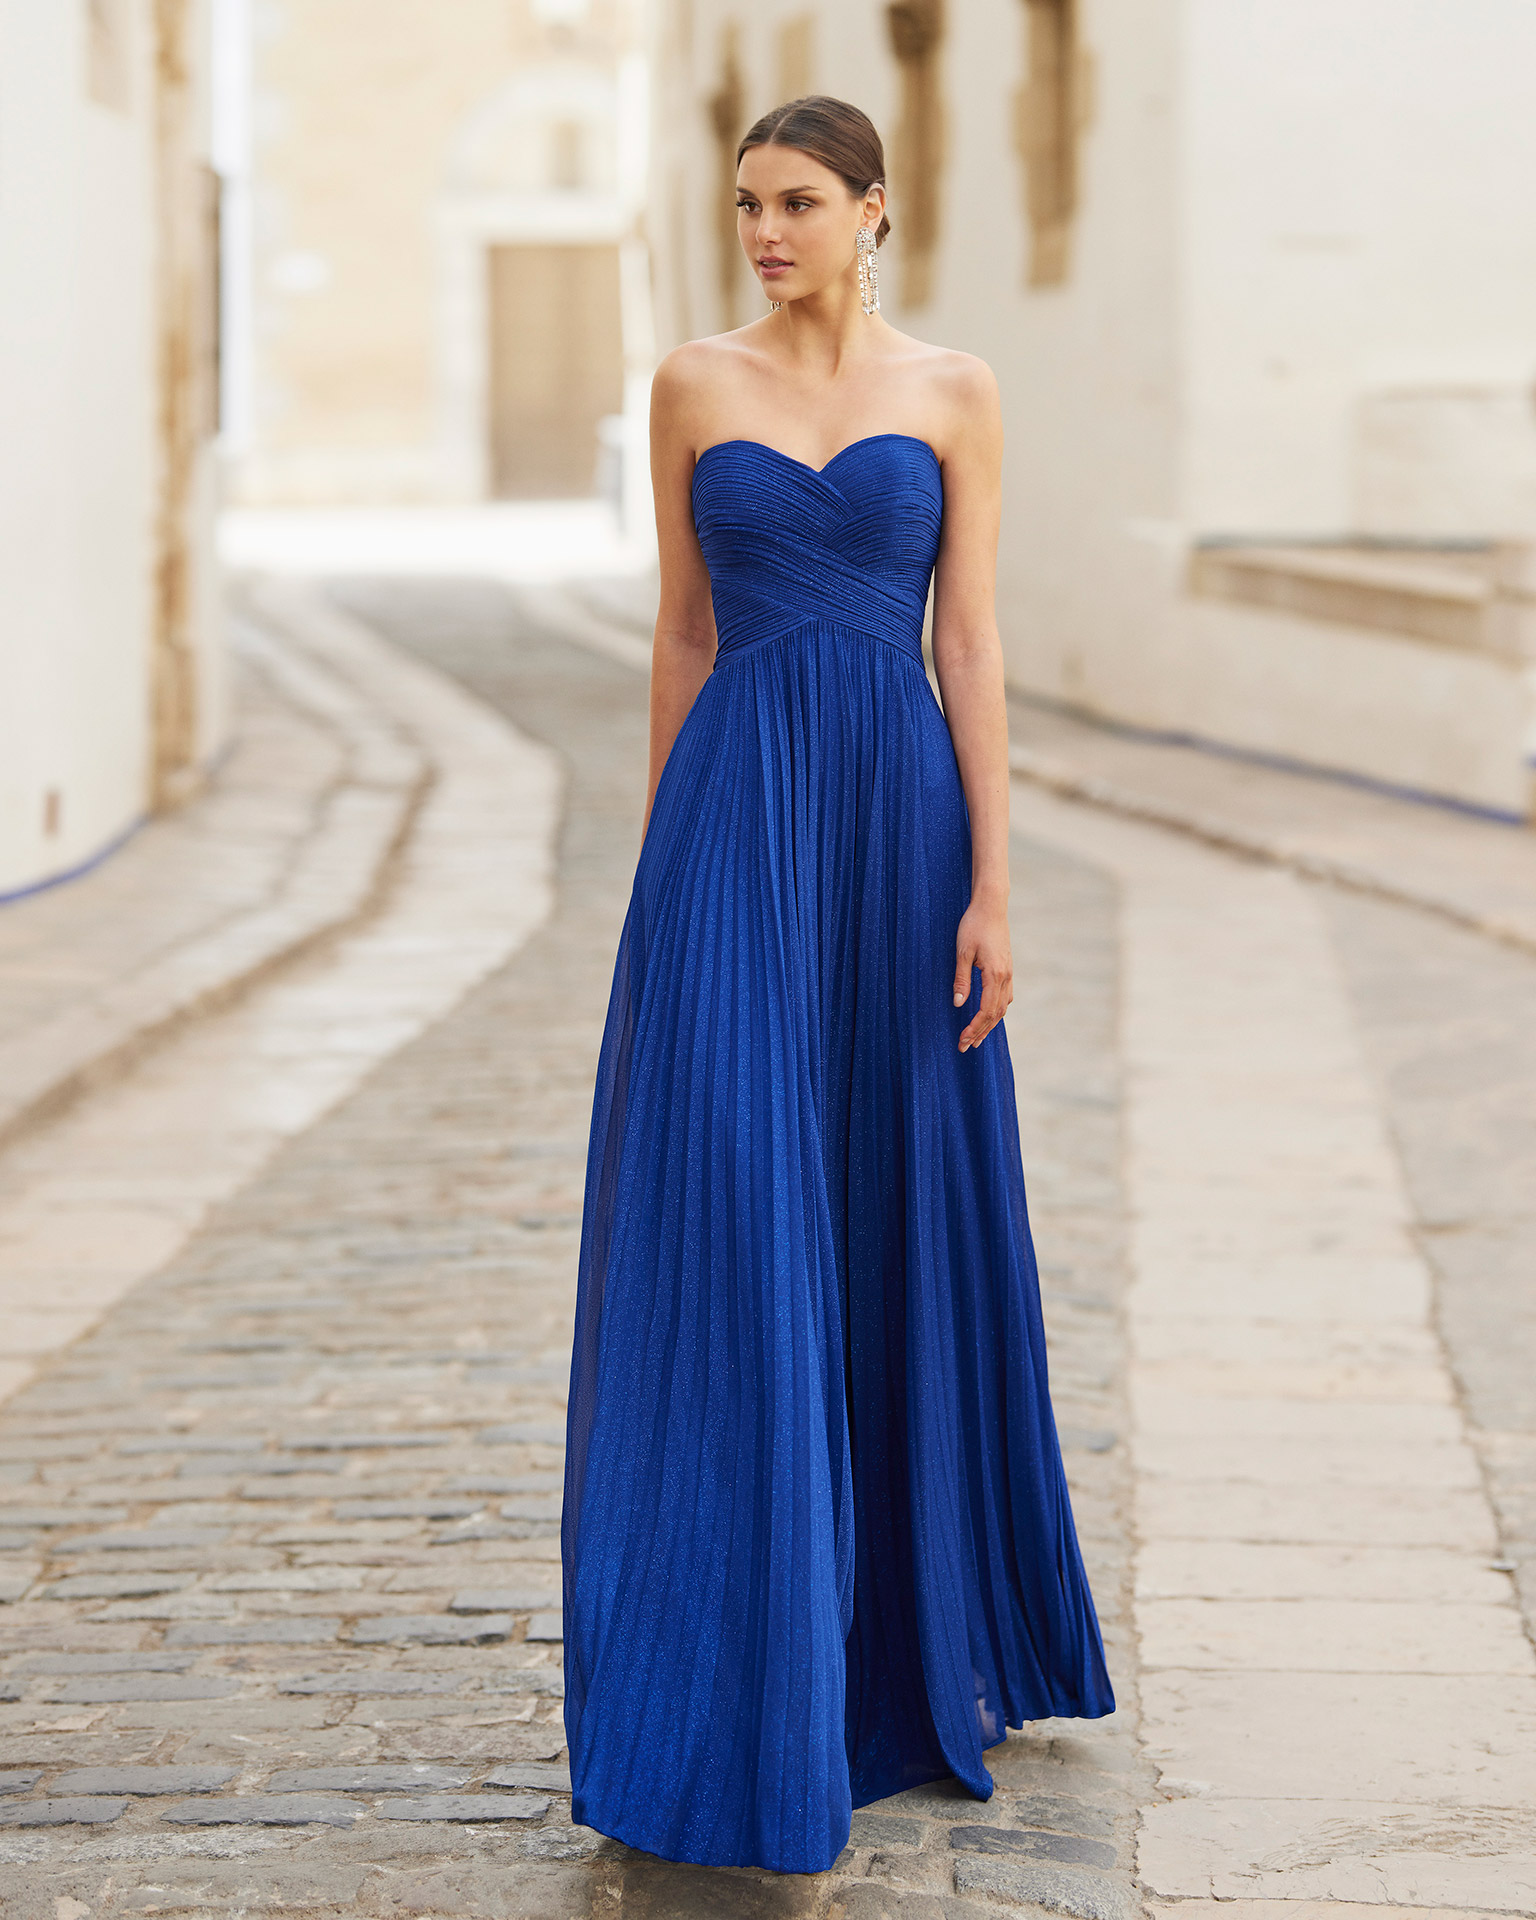 Lurex chiffon cocktail dress. Sweetheart neckline and low back. With shawl. 2022 MARFIL_BARCELONA Collection.